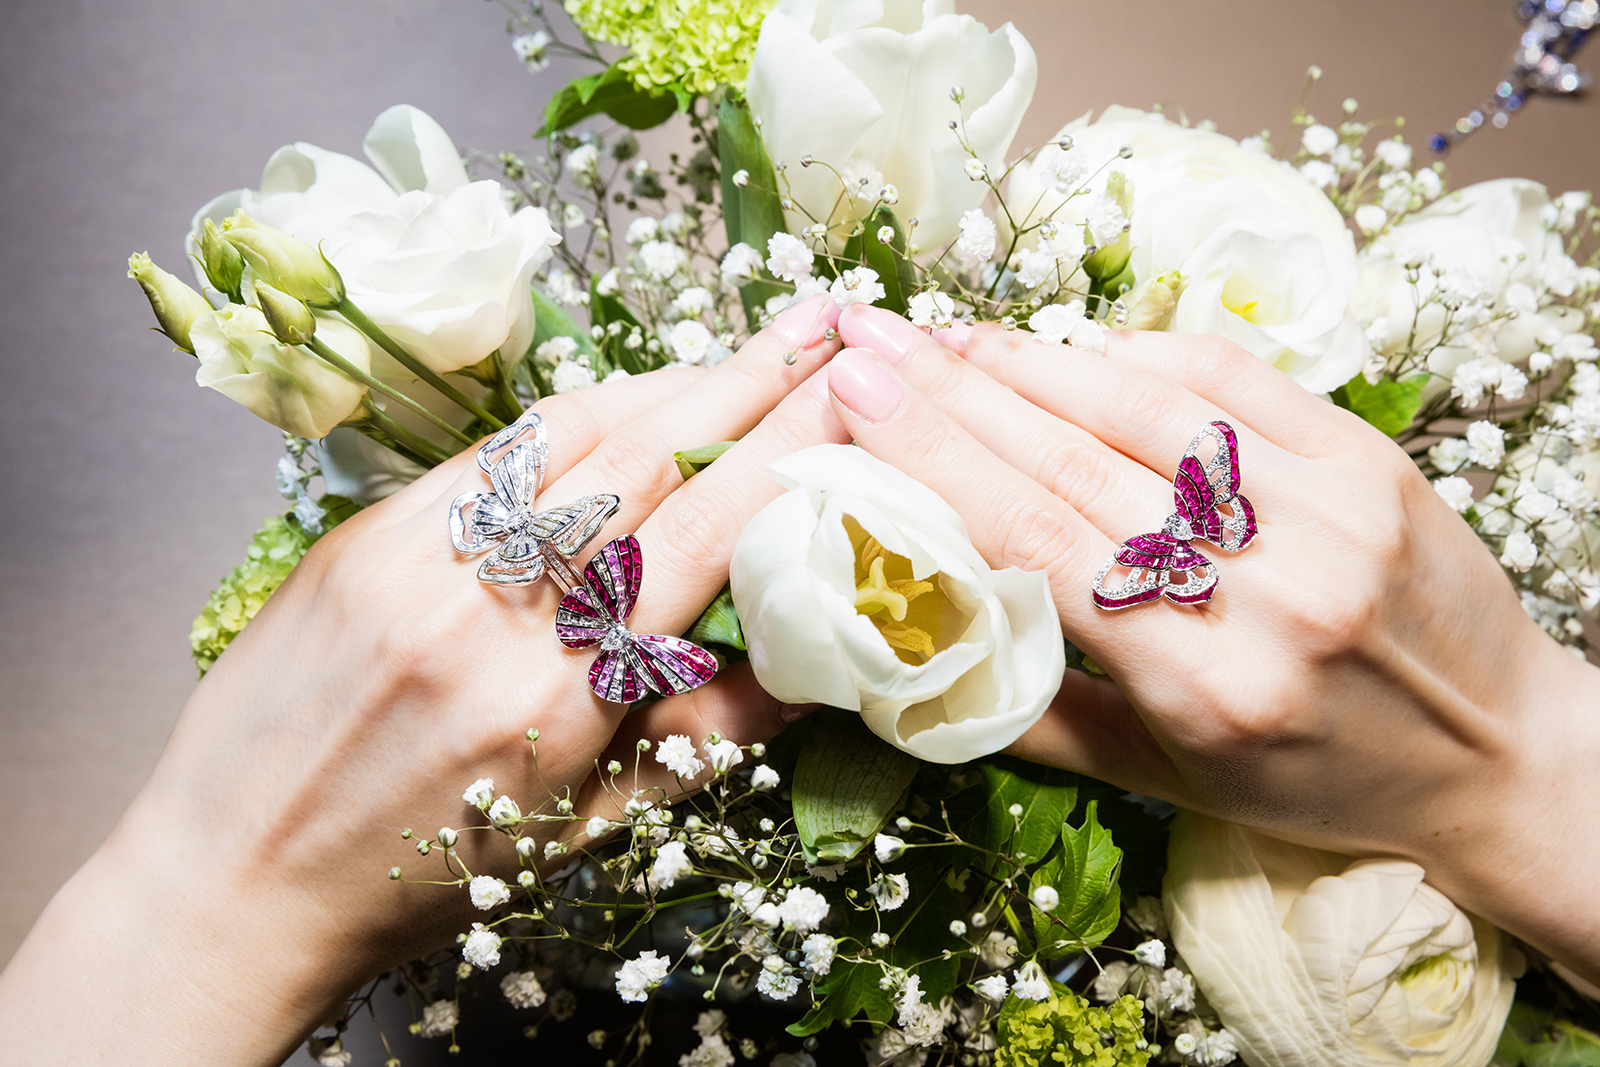 Stenzhorn 'Butterfly Lovers' rings in diamonds, rubies and pink sapphires, with removable 'kimono' ring jackets